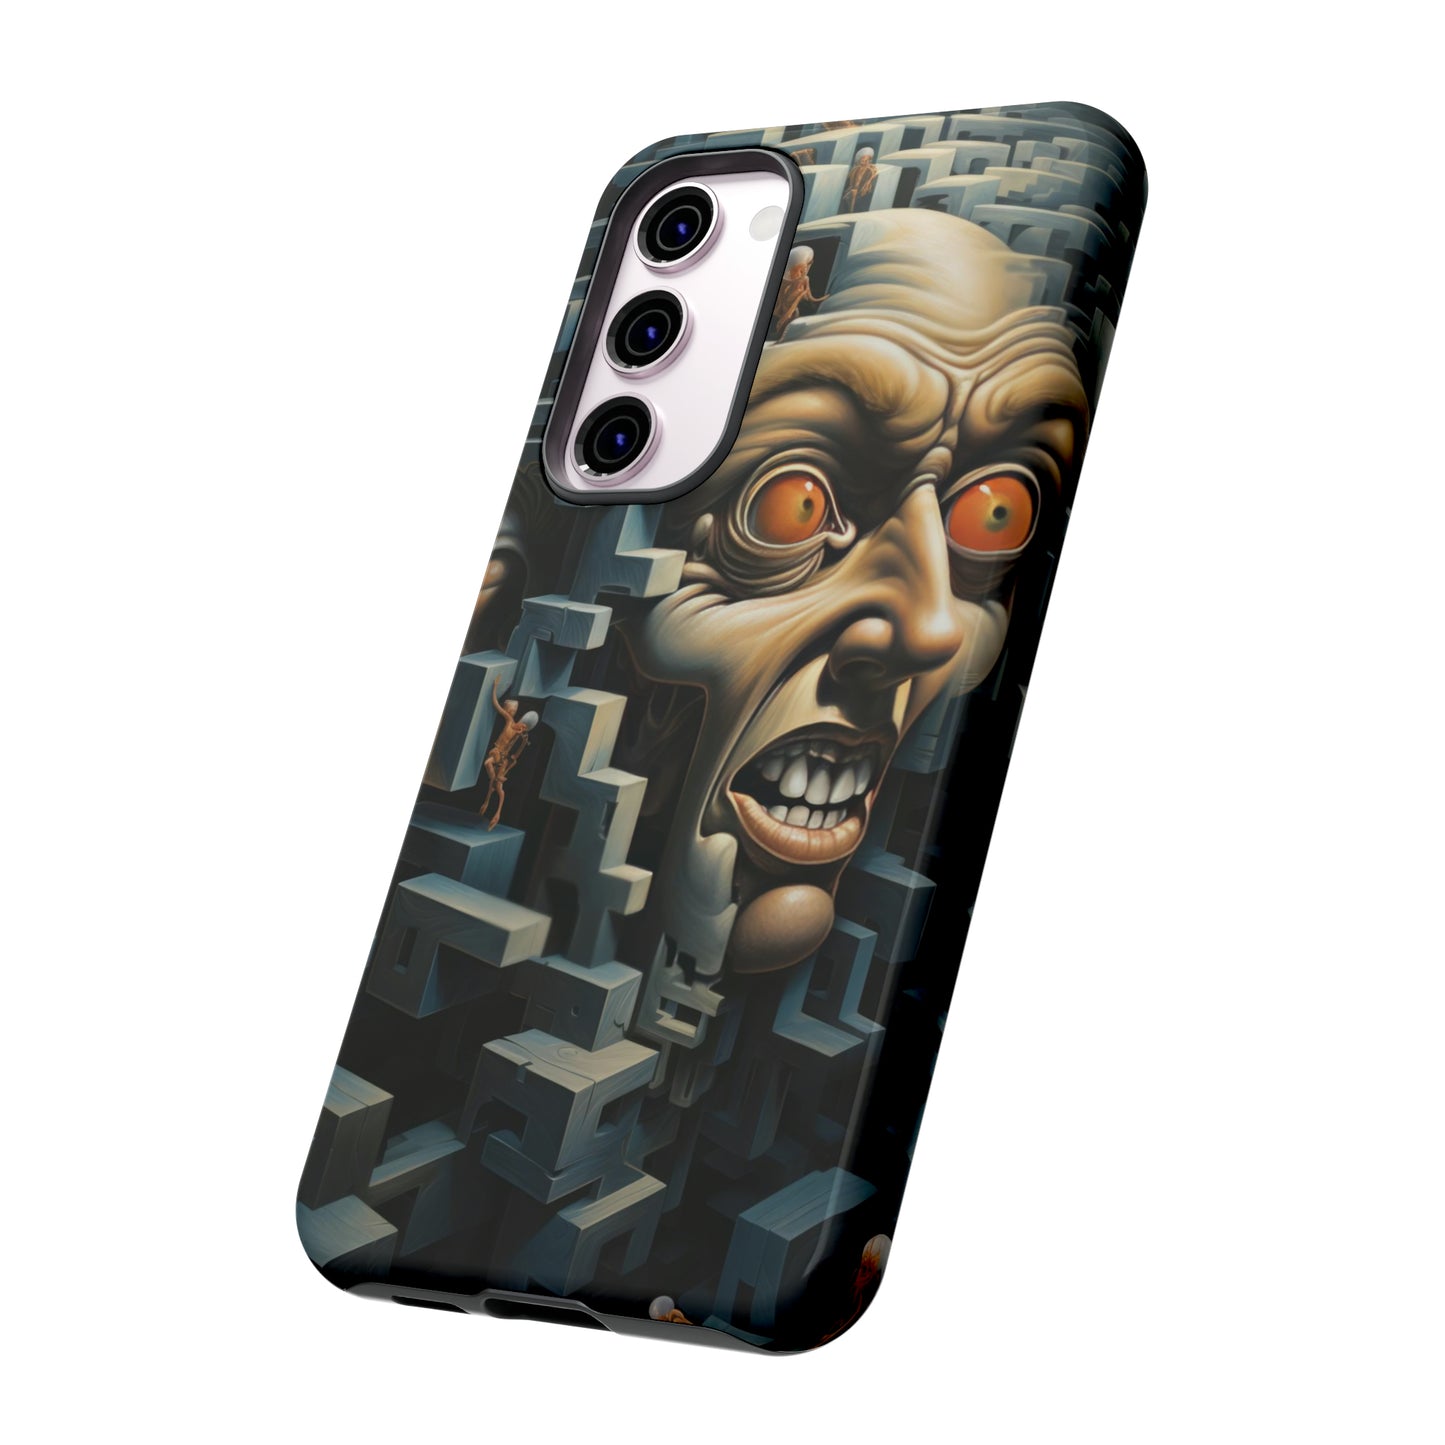 Surreal Labyrinth Entrapment - Puzzling Face Design for iPhone, Samsung, Pixel